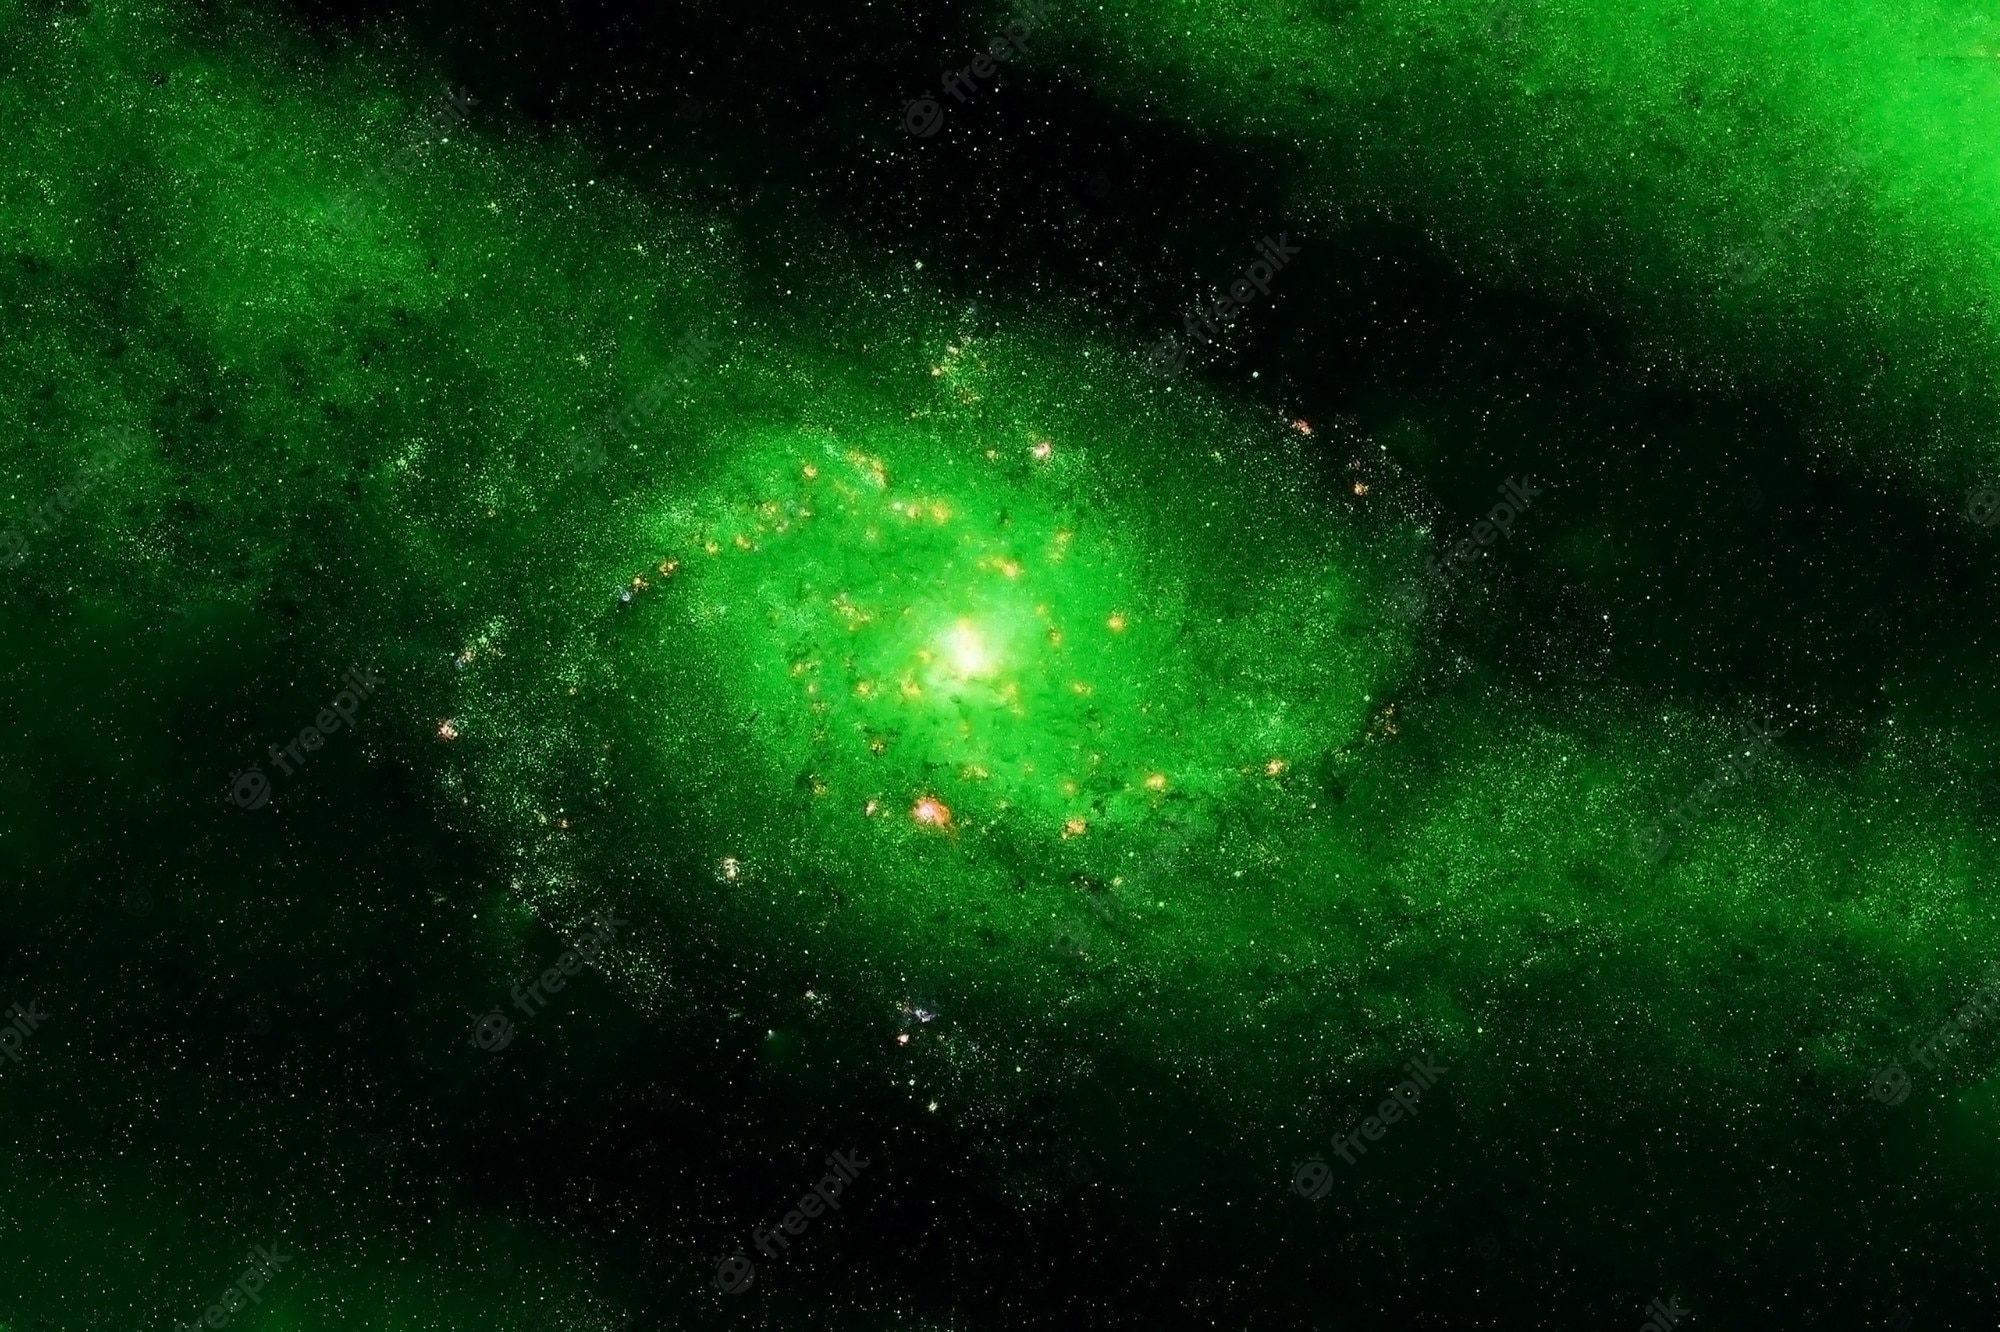 https://www.bhmpics.com/downloads/green-galaxy-wallpaper/6.big-green-galaxy-elements-this-image-were-furnished-by-nasa-high-quality-photo_496756-5036.jpg